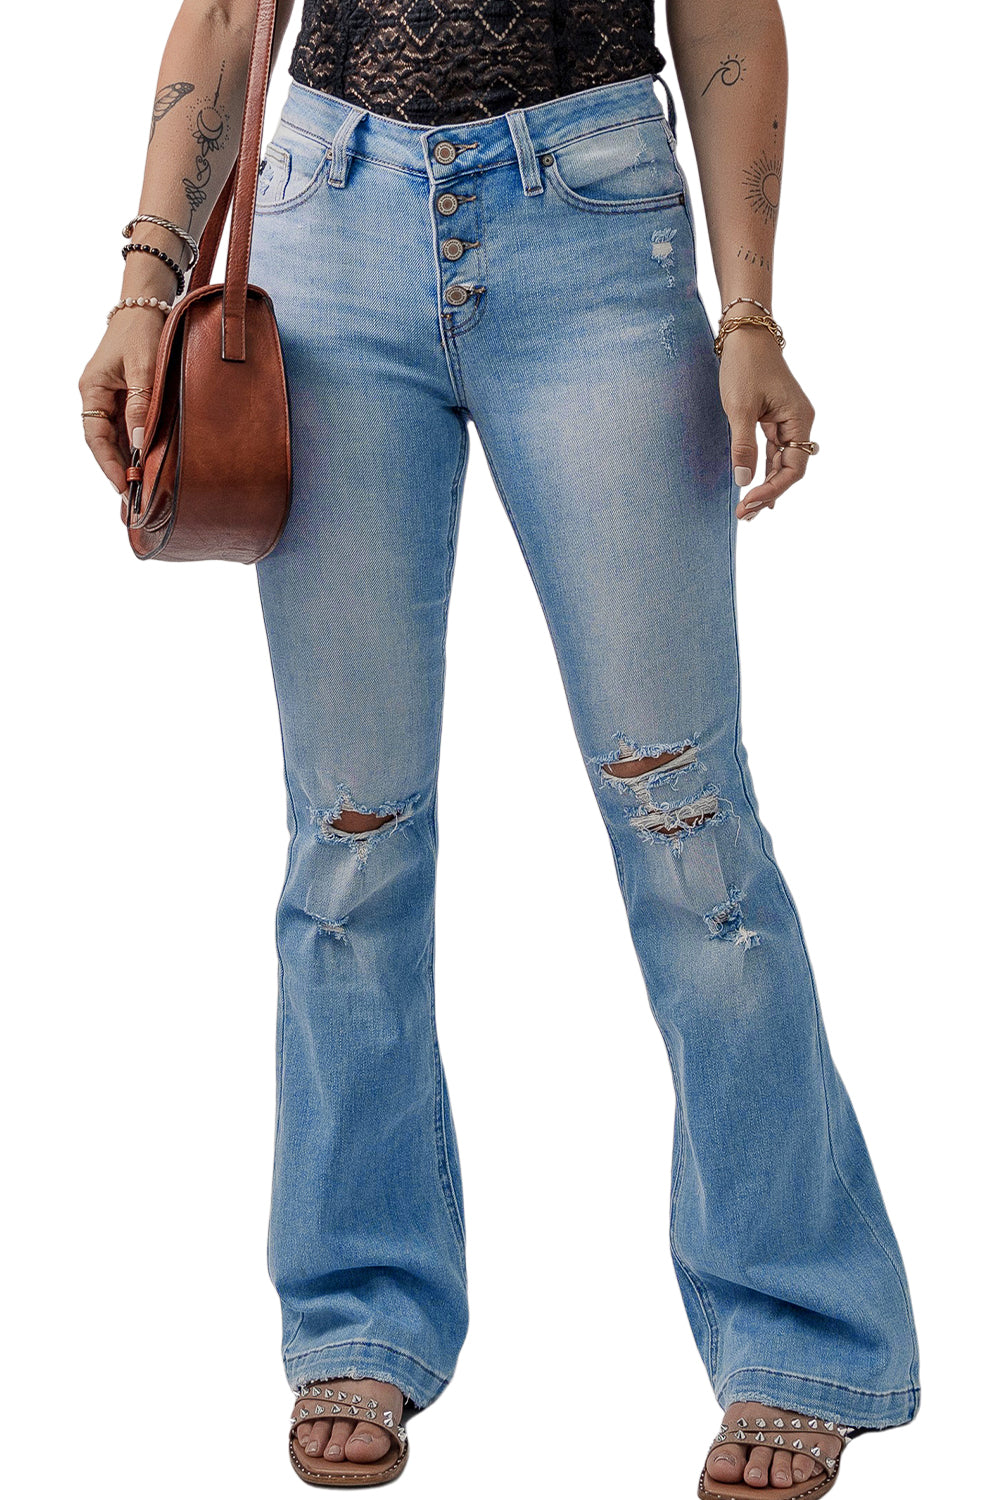 Beau Blue High Waist Button Front Ripped Flare Jeans